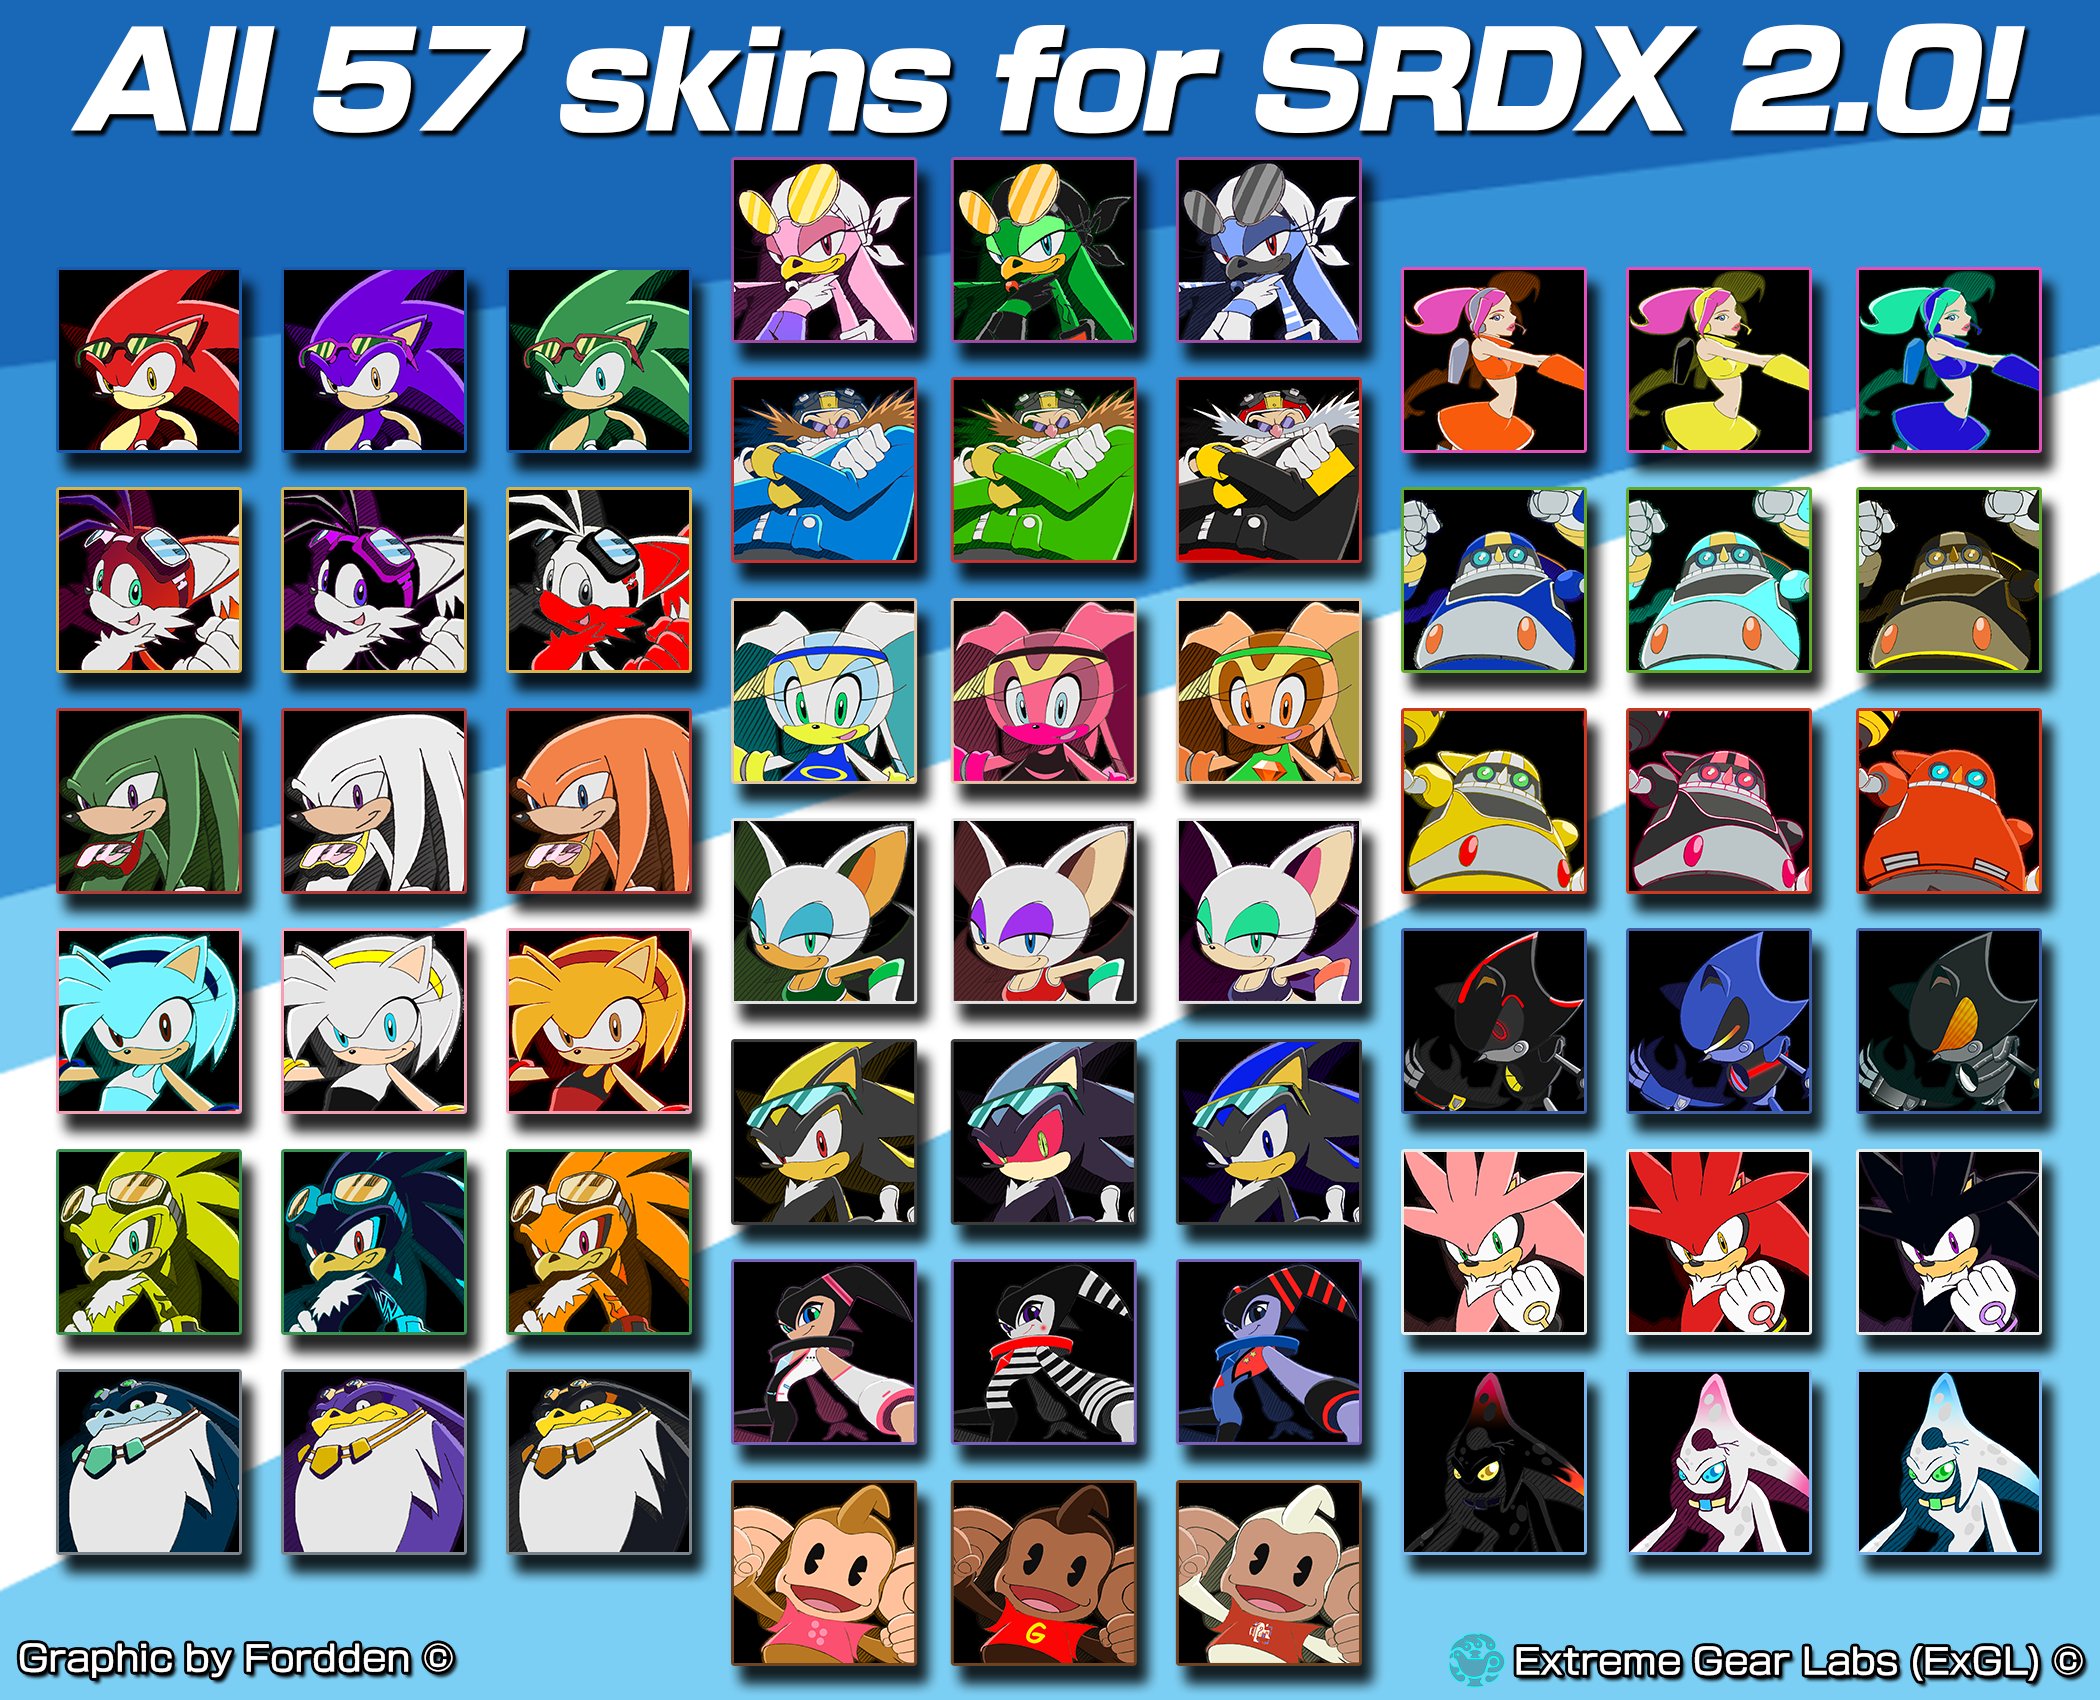 SAGE 2022 - Complete - Sonic Riders DX Version 2.0